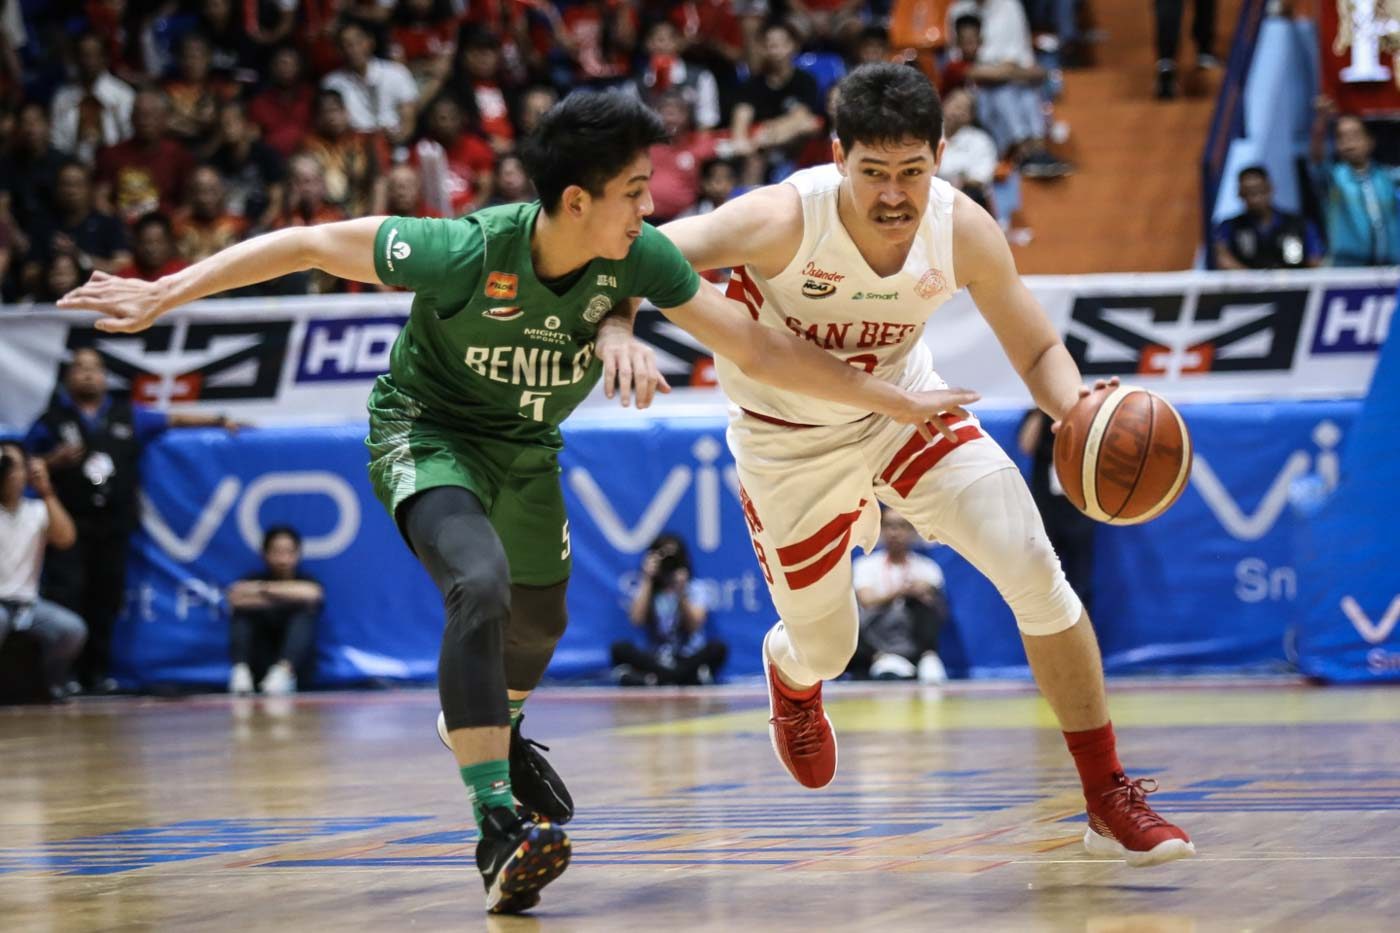 San Beda moves closer to twice-to-beat bonus with CSB rout